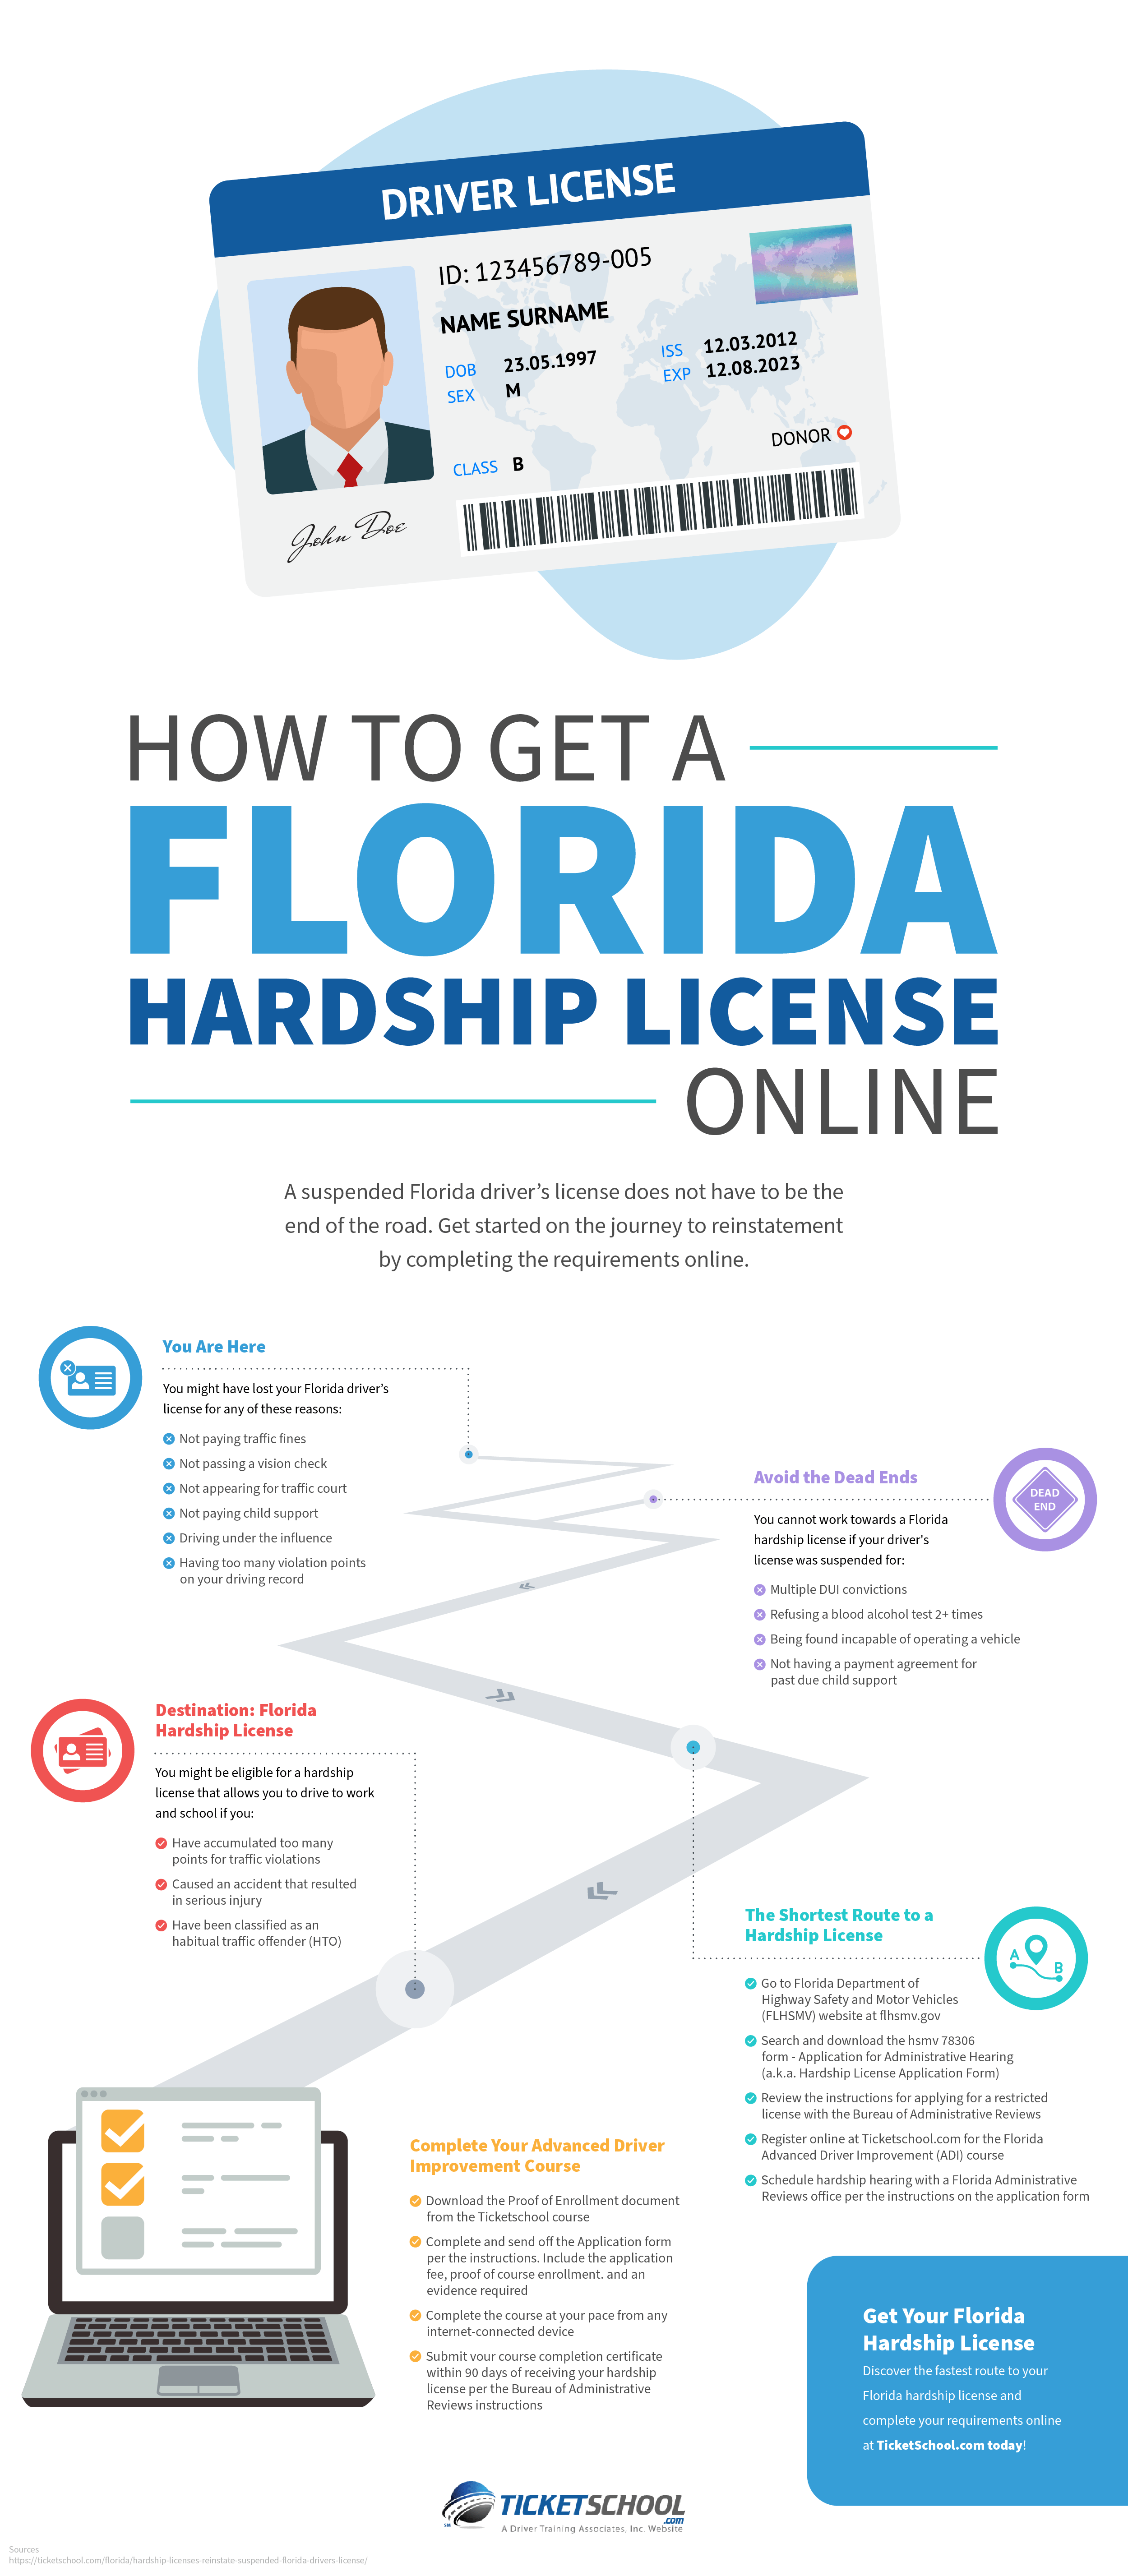 How to Get a Florida Hardship License Online Infographic